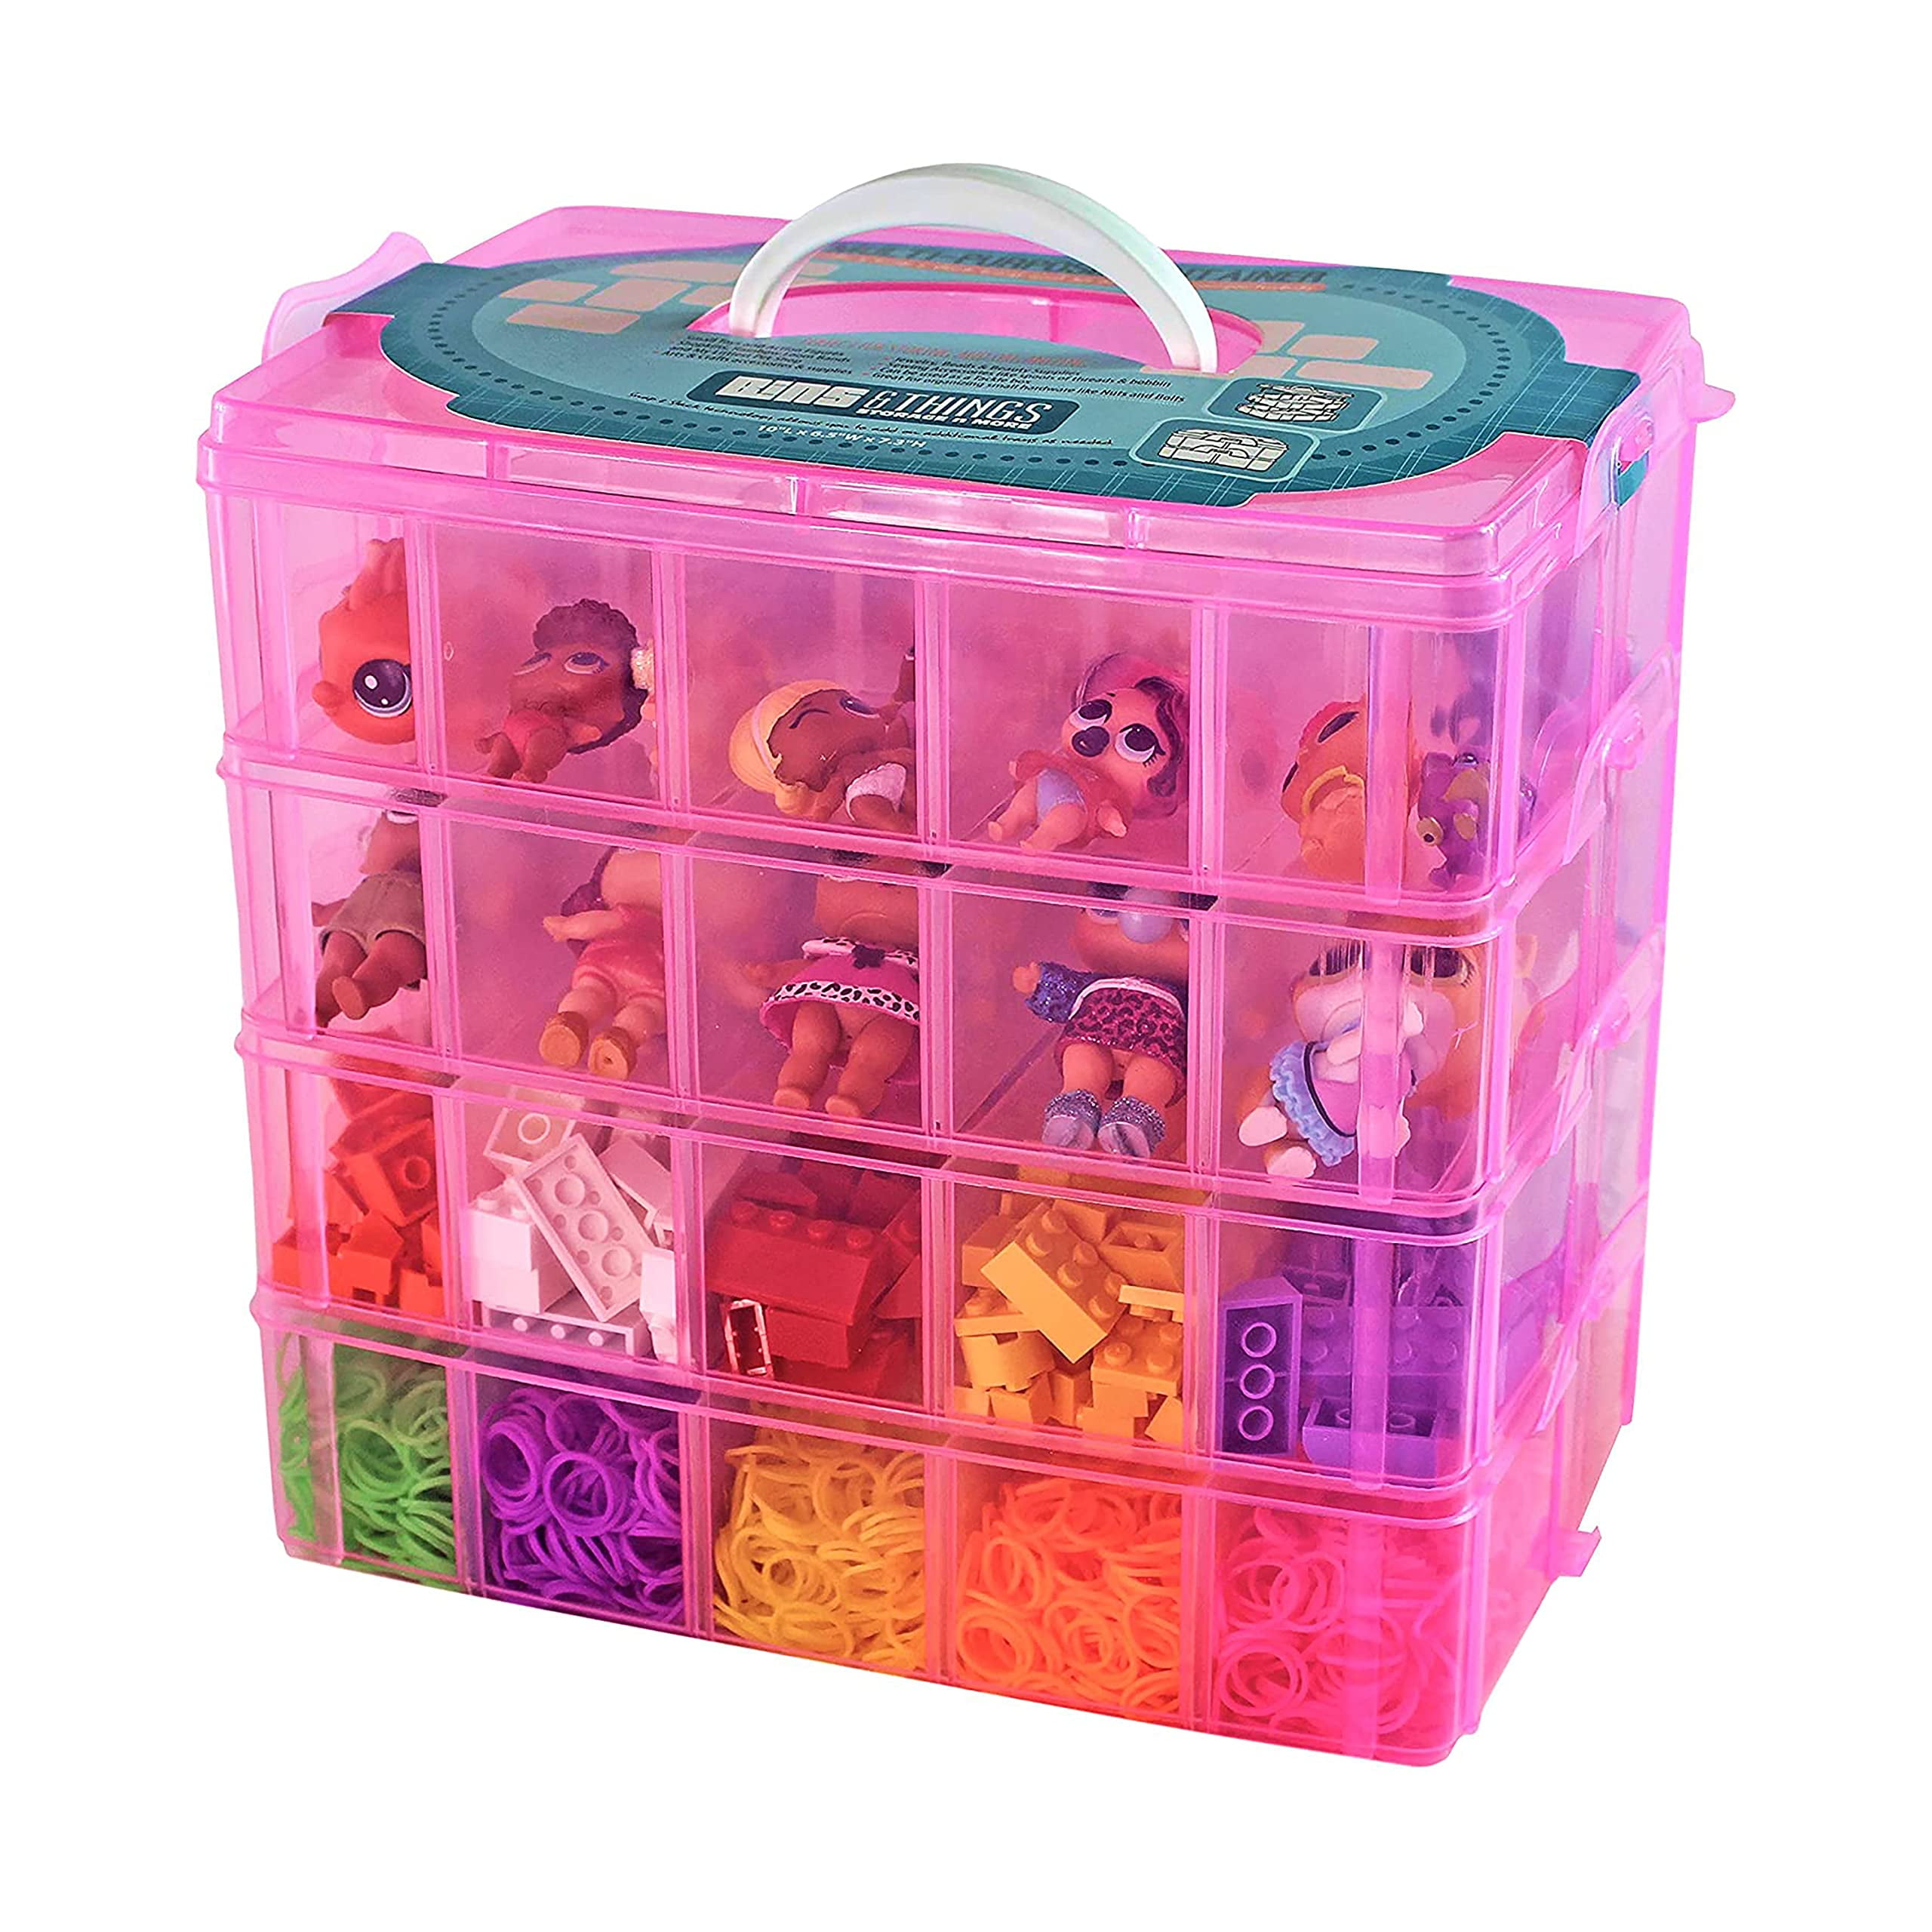 Bins & Things Stackable Toys Organizer for Lego and Hot Wheels